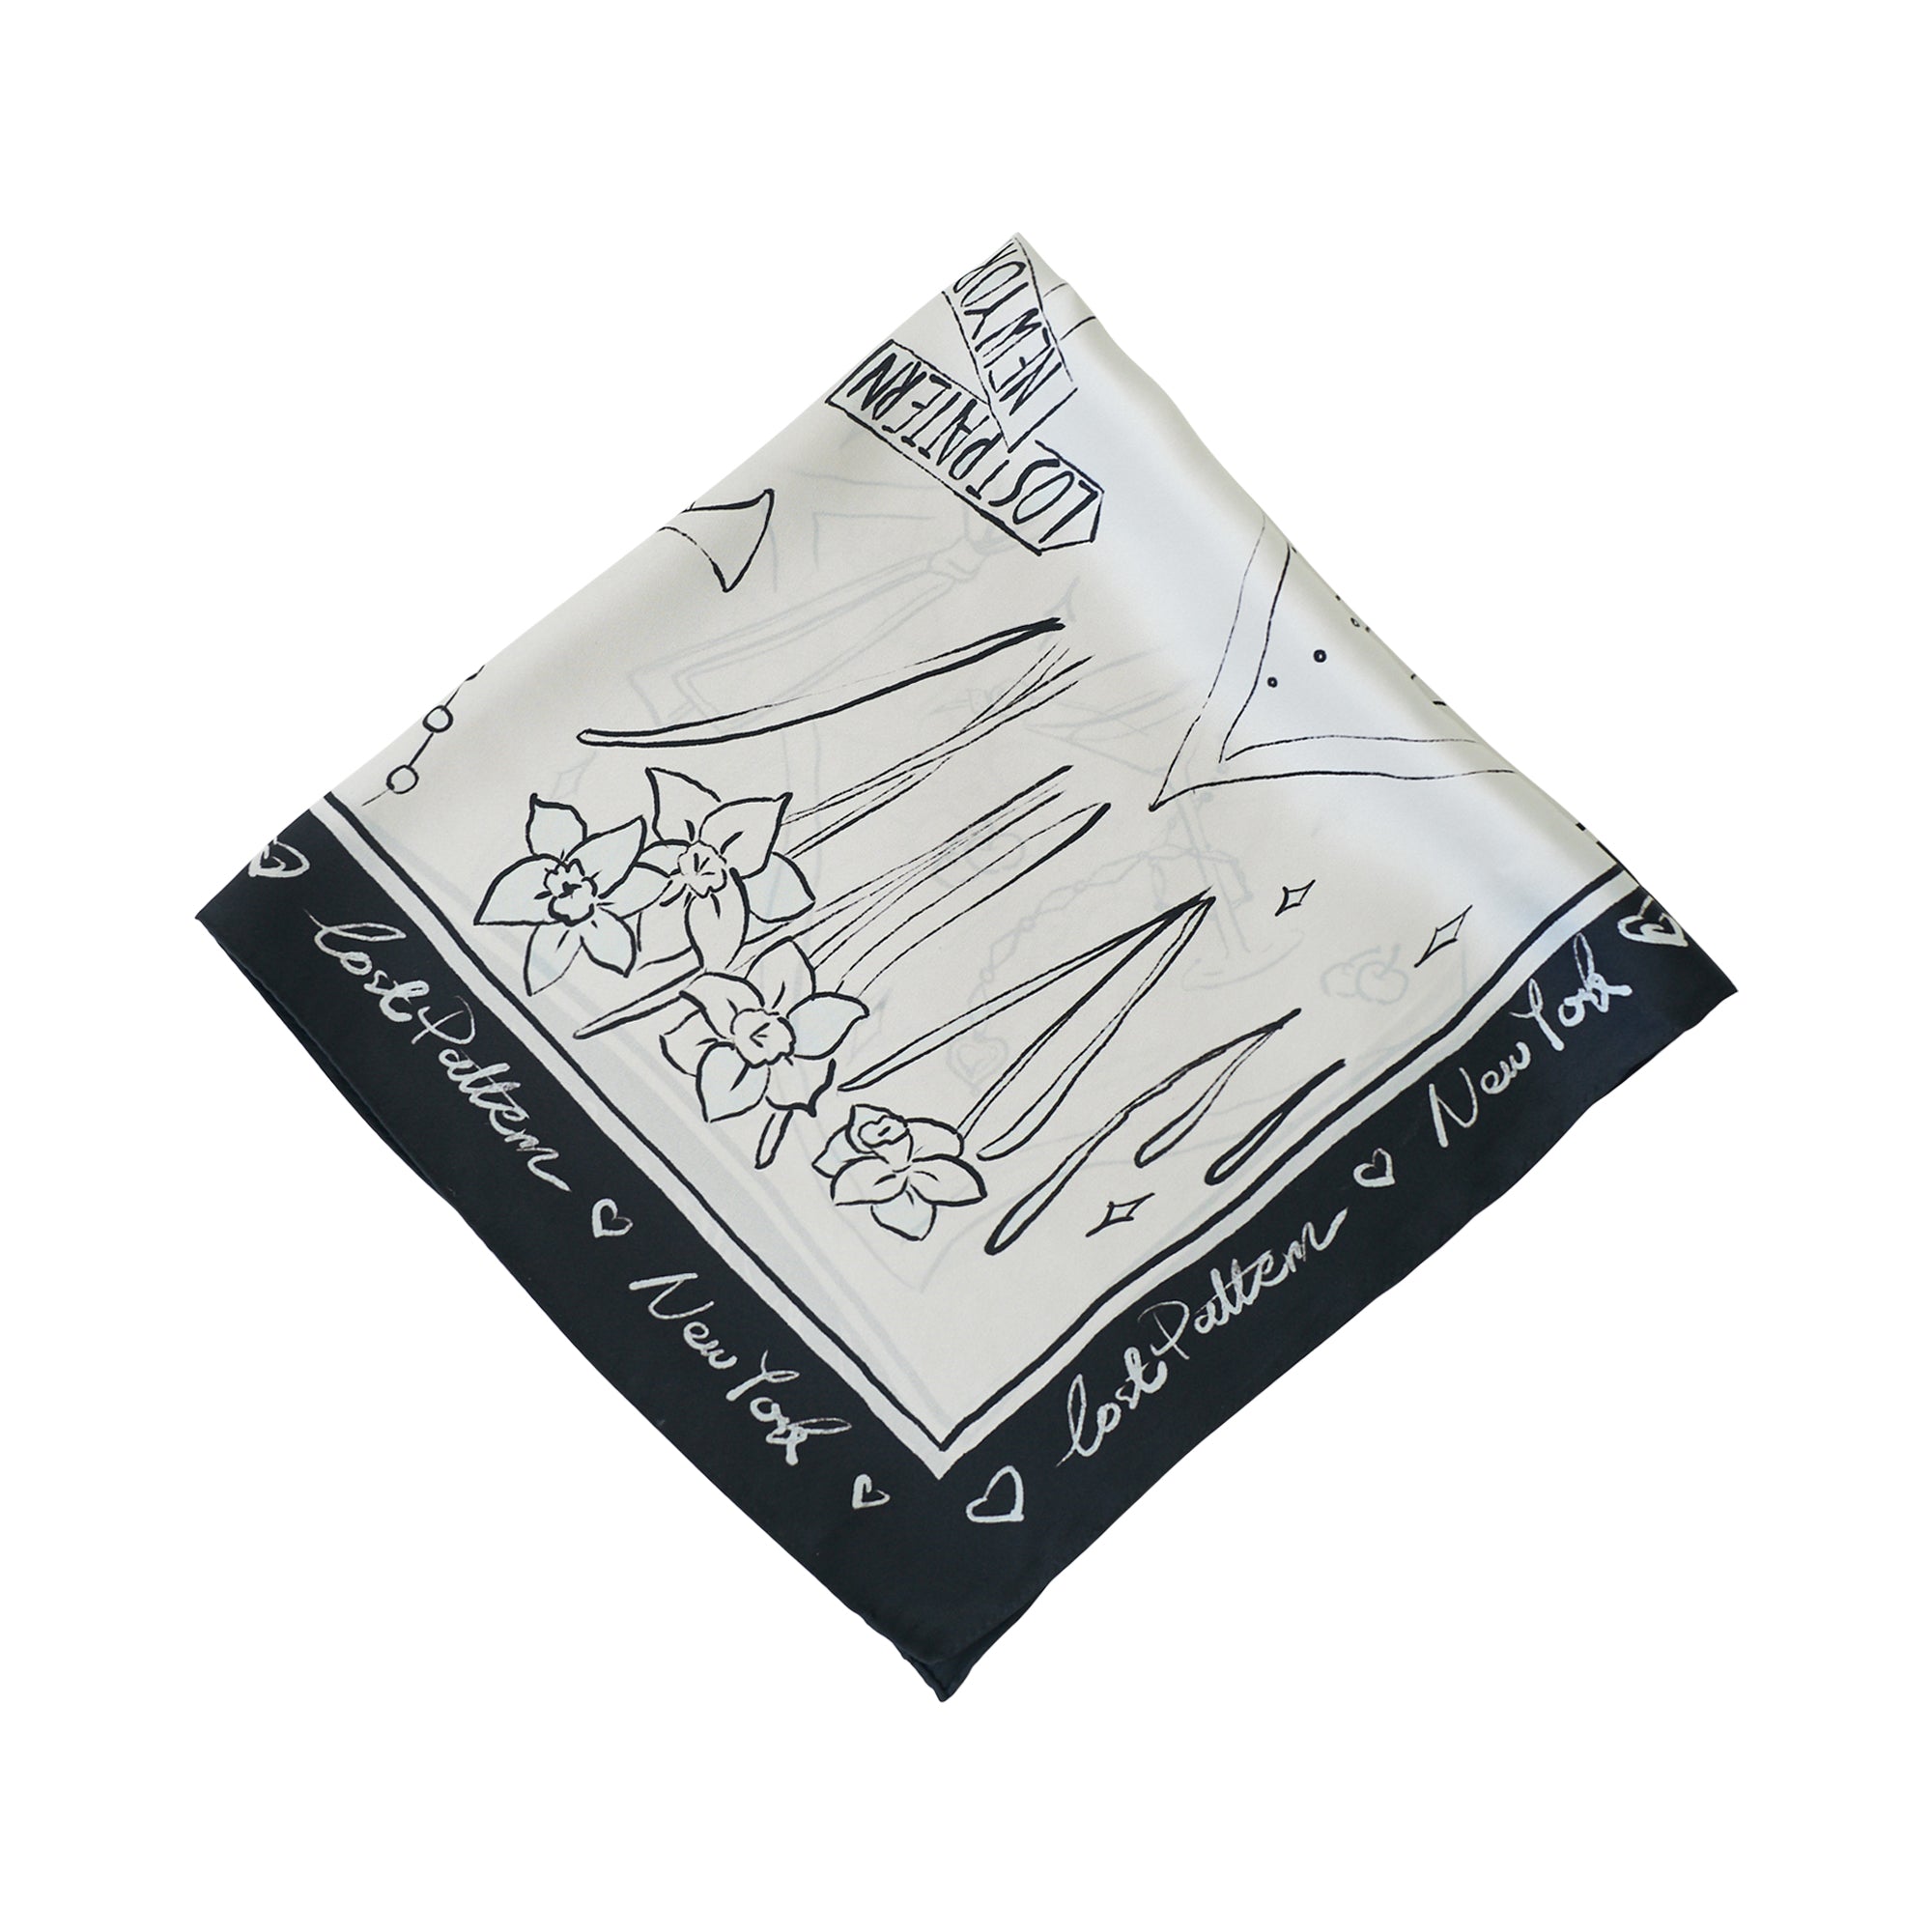 "New York in Sketches" Silk Scarf - Black & White - LOST PATTERN Silk Square Scarf